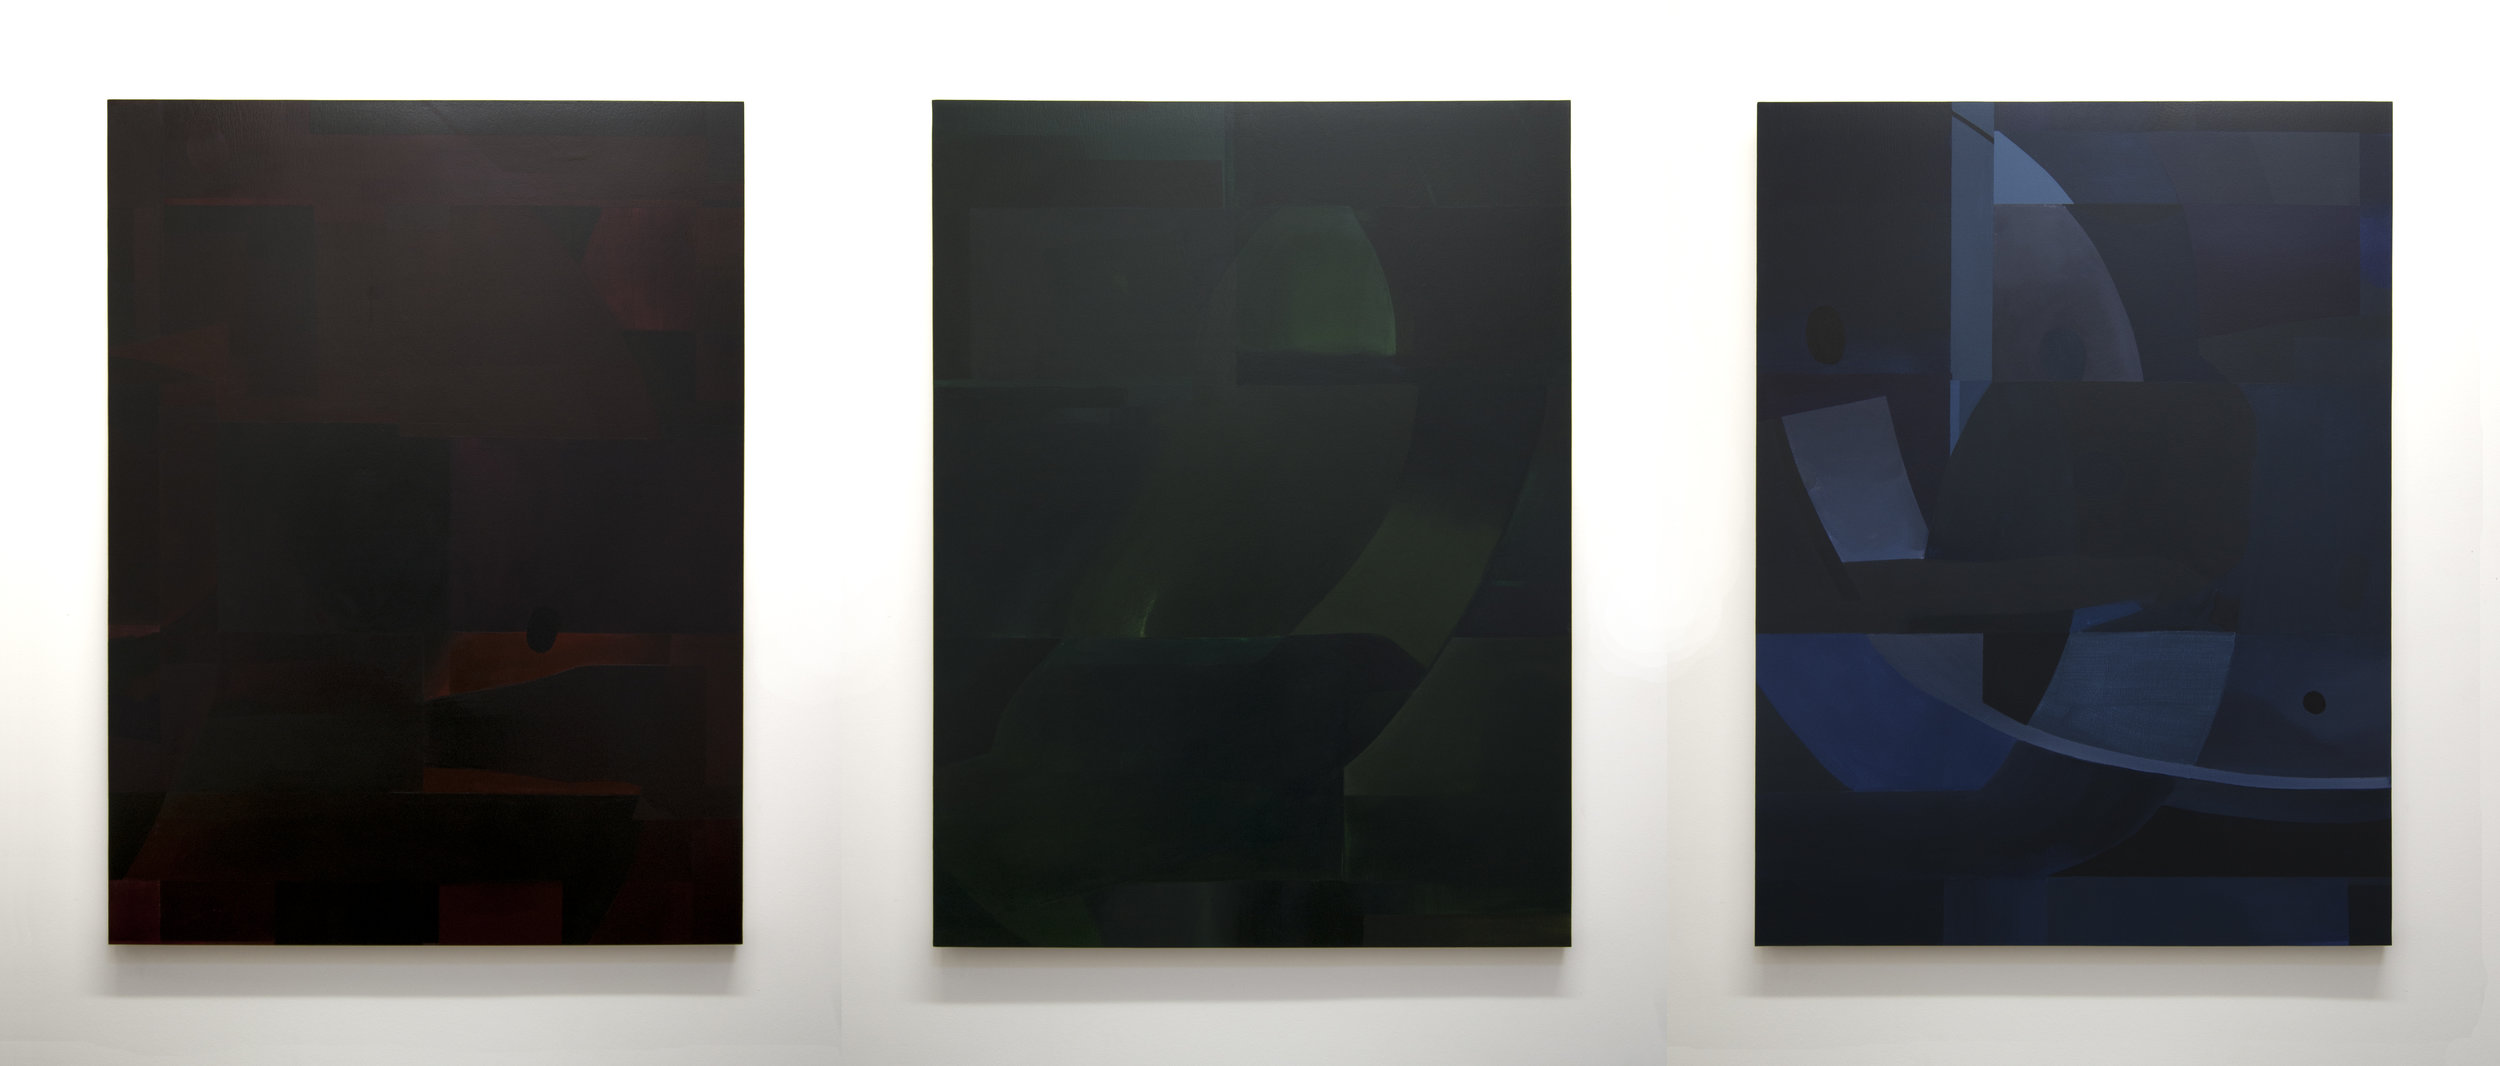  The Warnings and the Signs (Red, Green, Blue), 2014 (Installation view)  Acrylic on panel, 48 x 36 inches each 